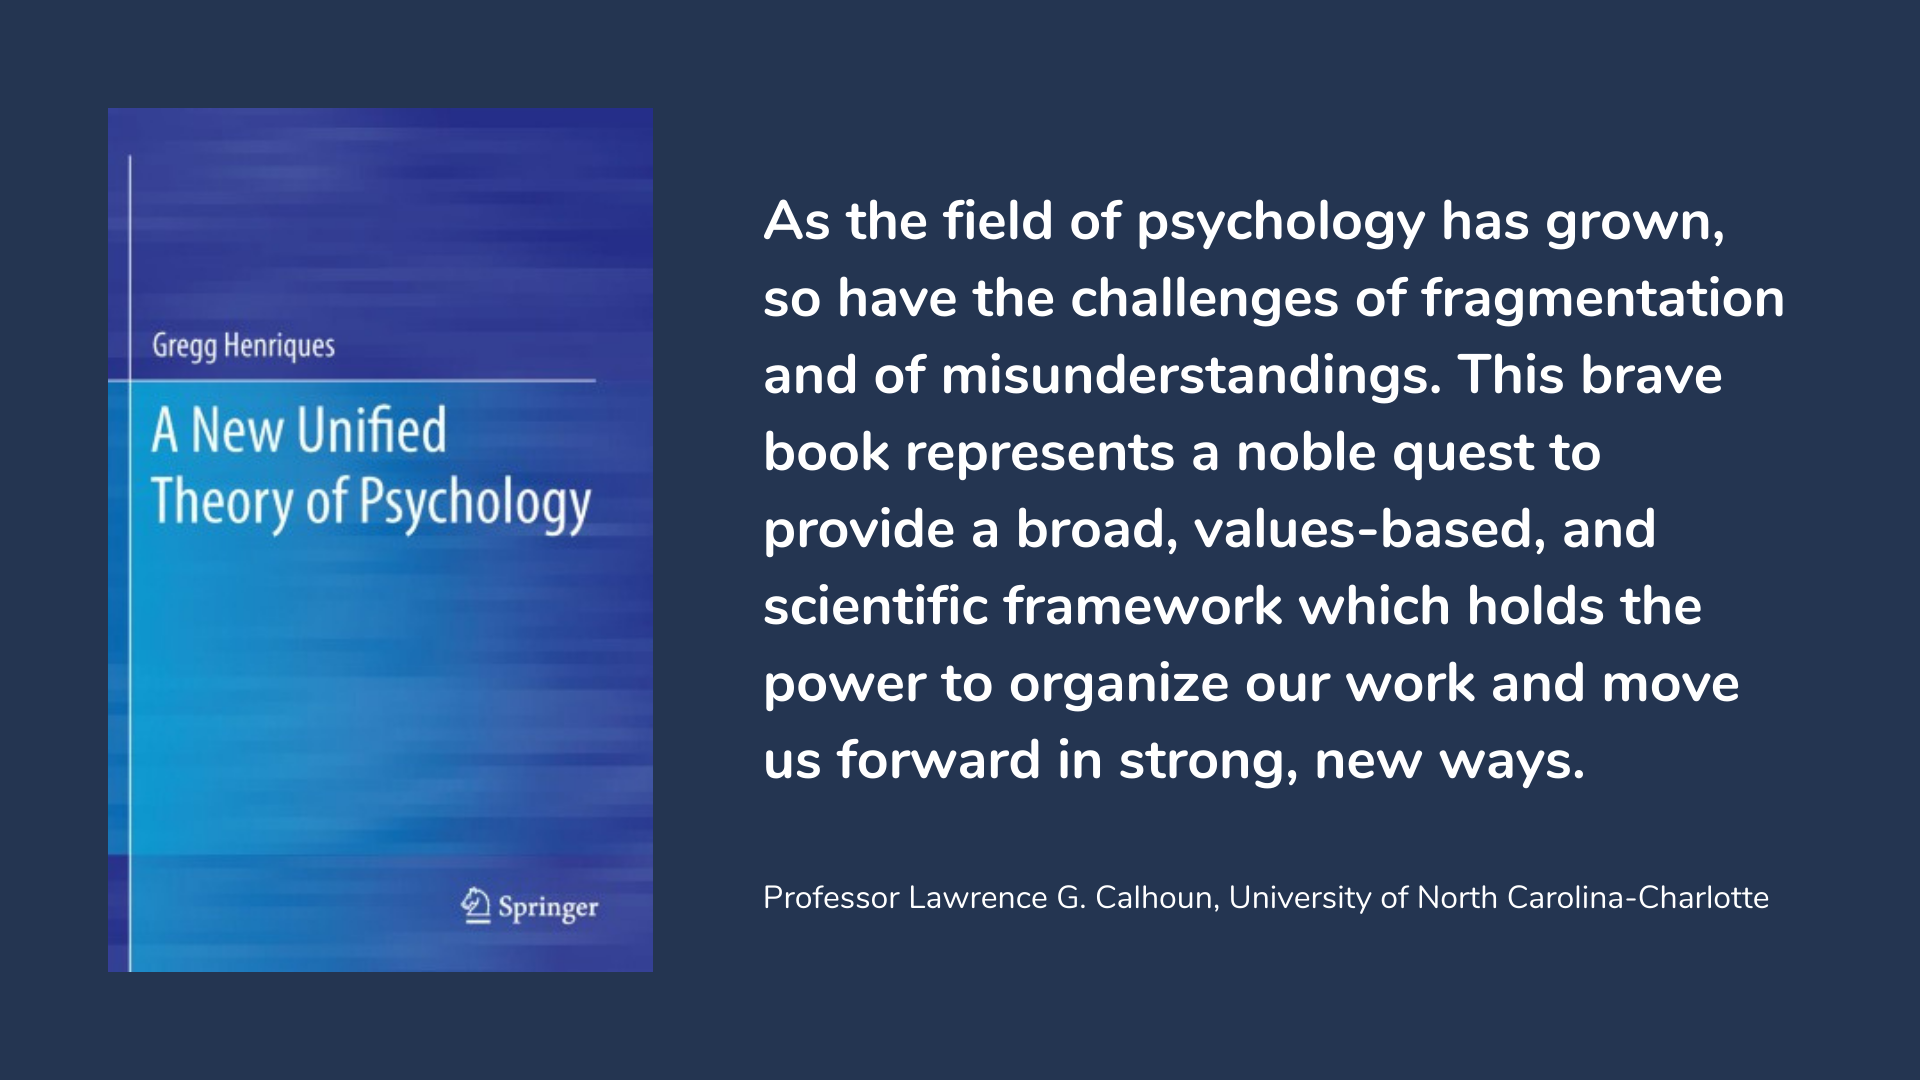 A New Unified Theory of Psychology by Gregg Henriques Ph.D., book cover and description.